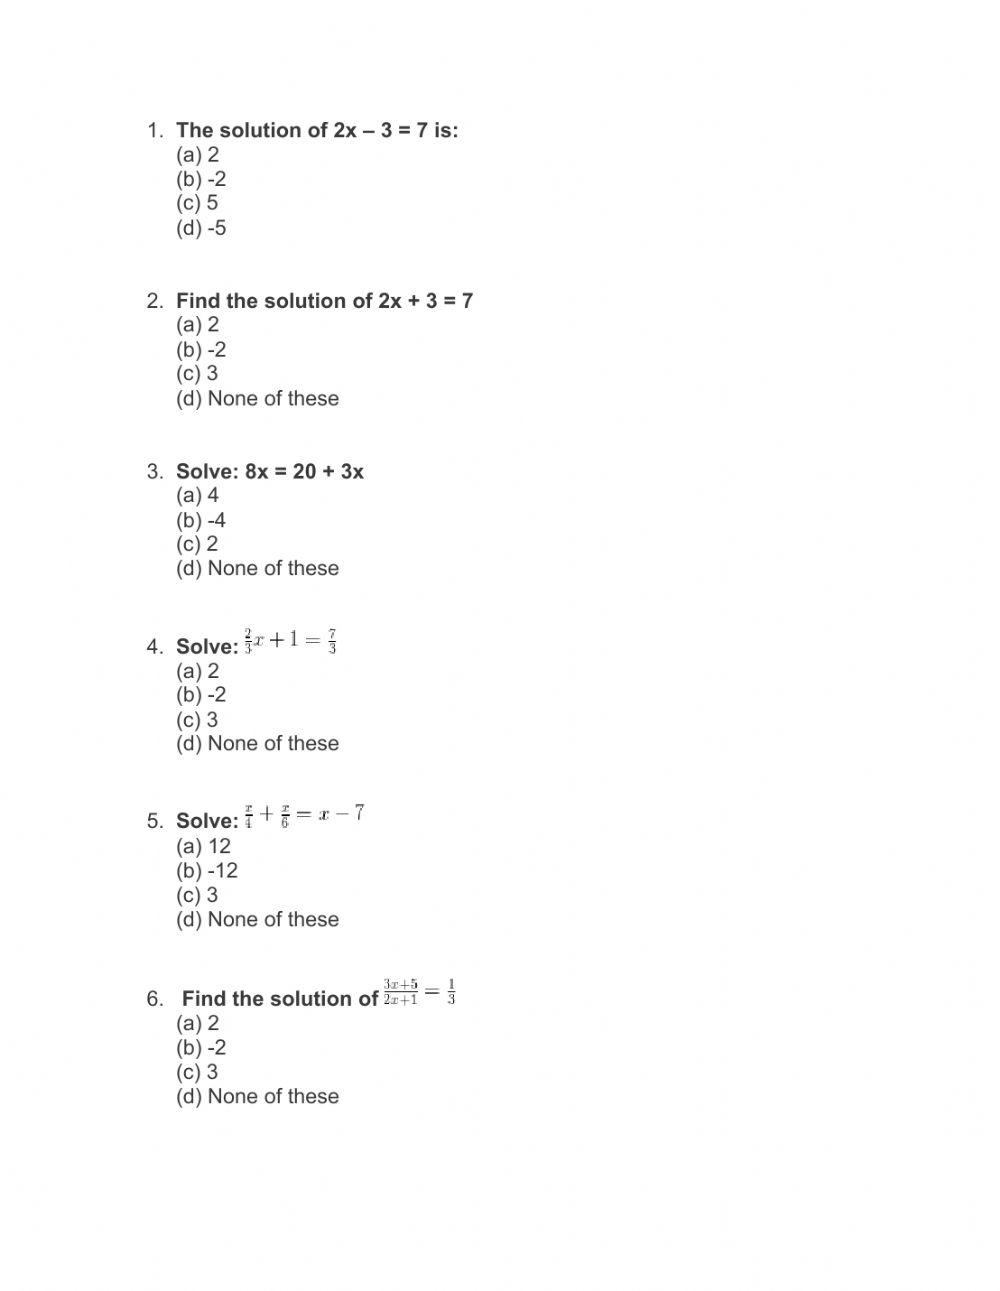 Linear equations solve for x